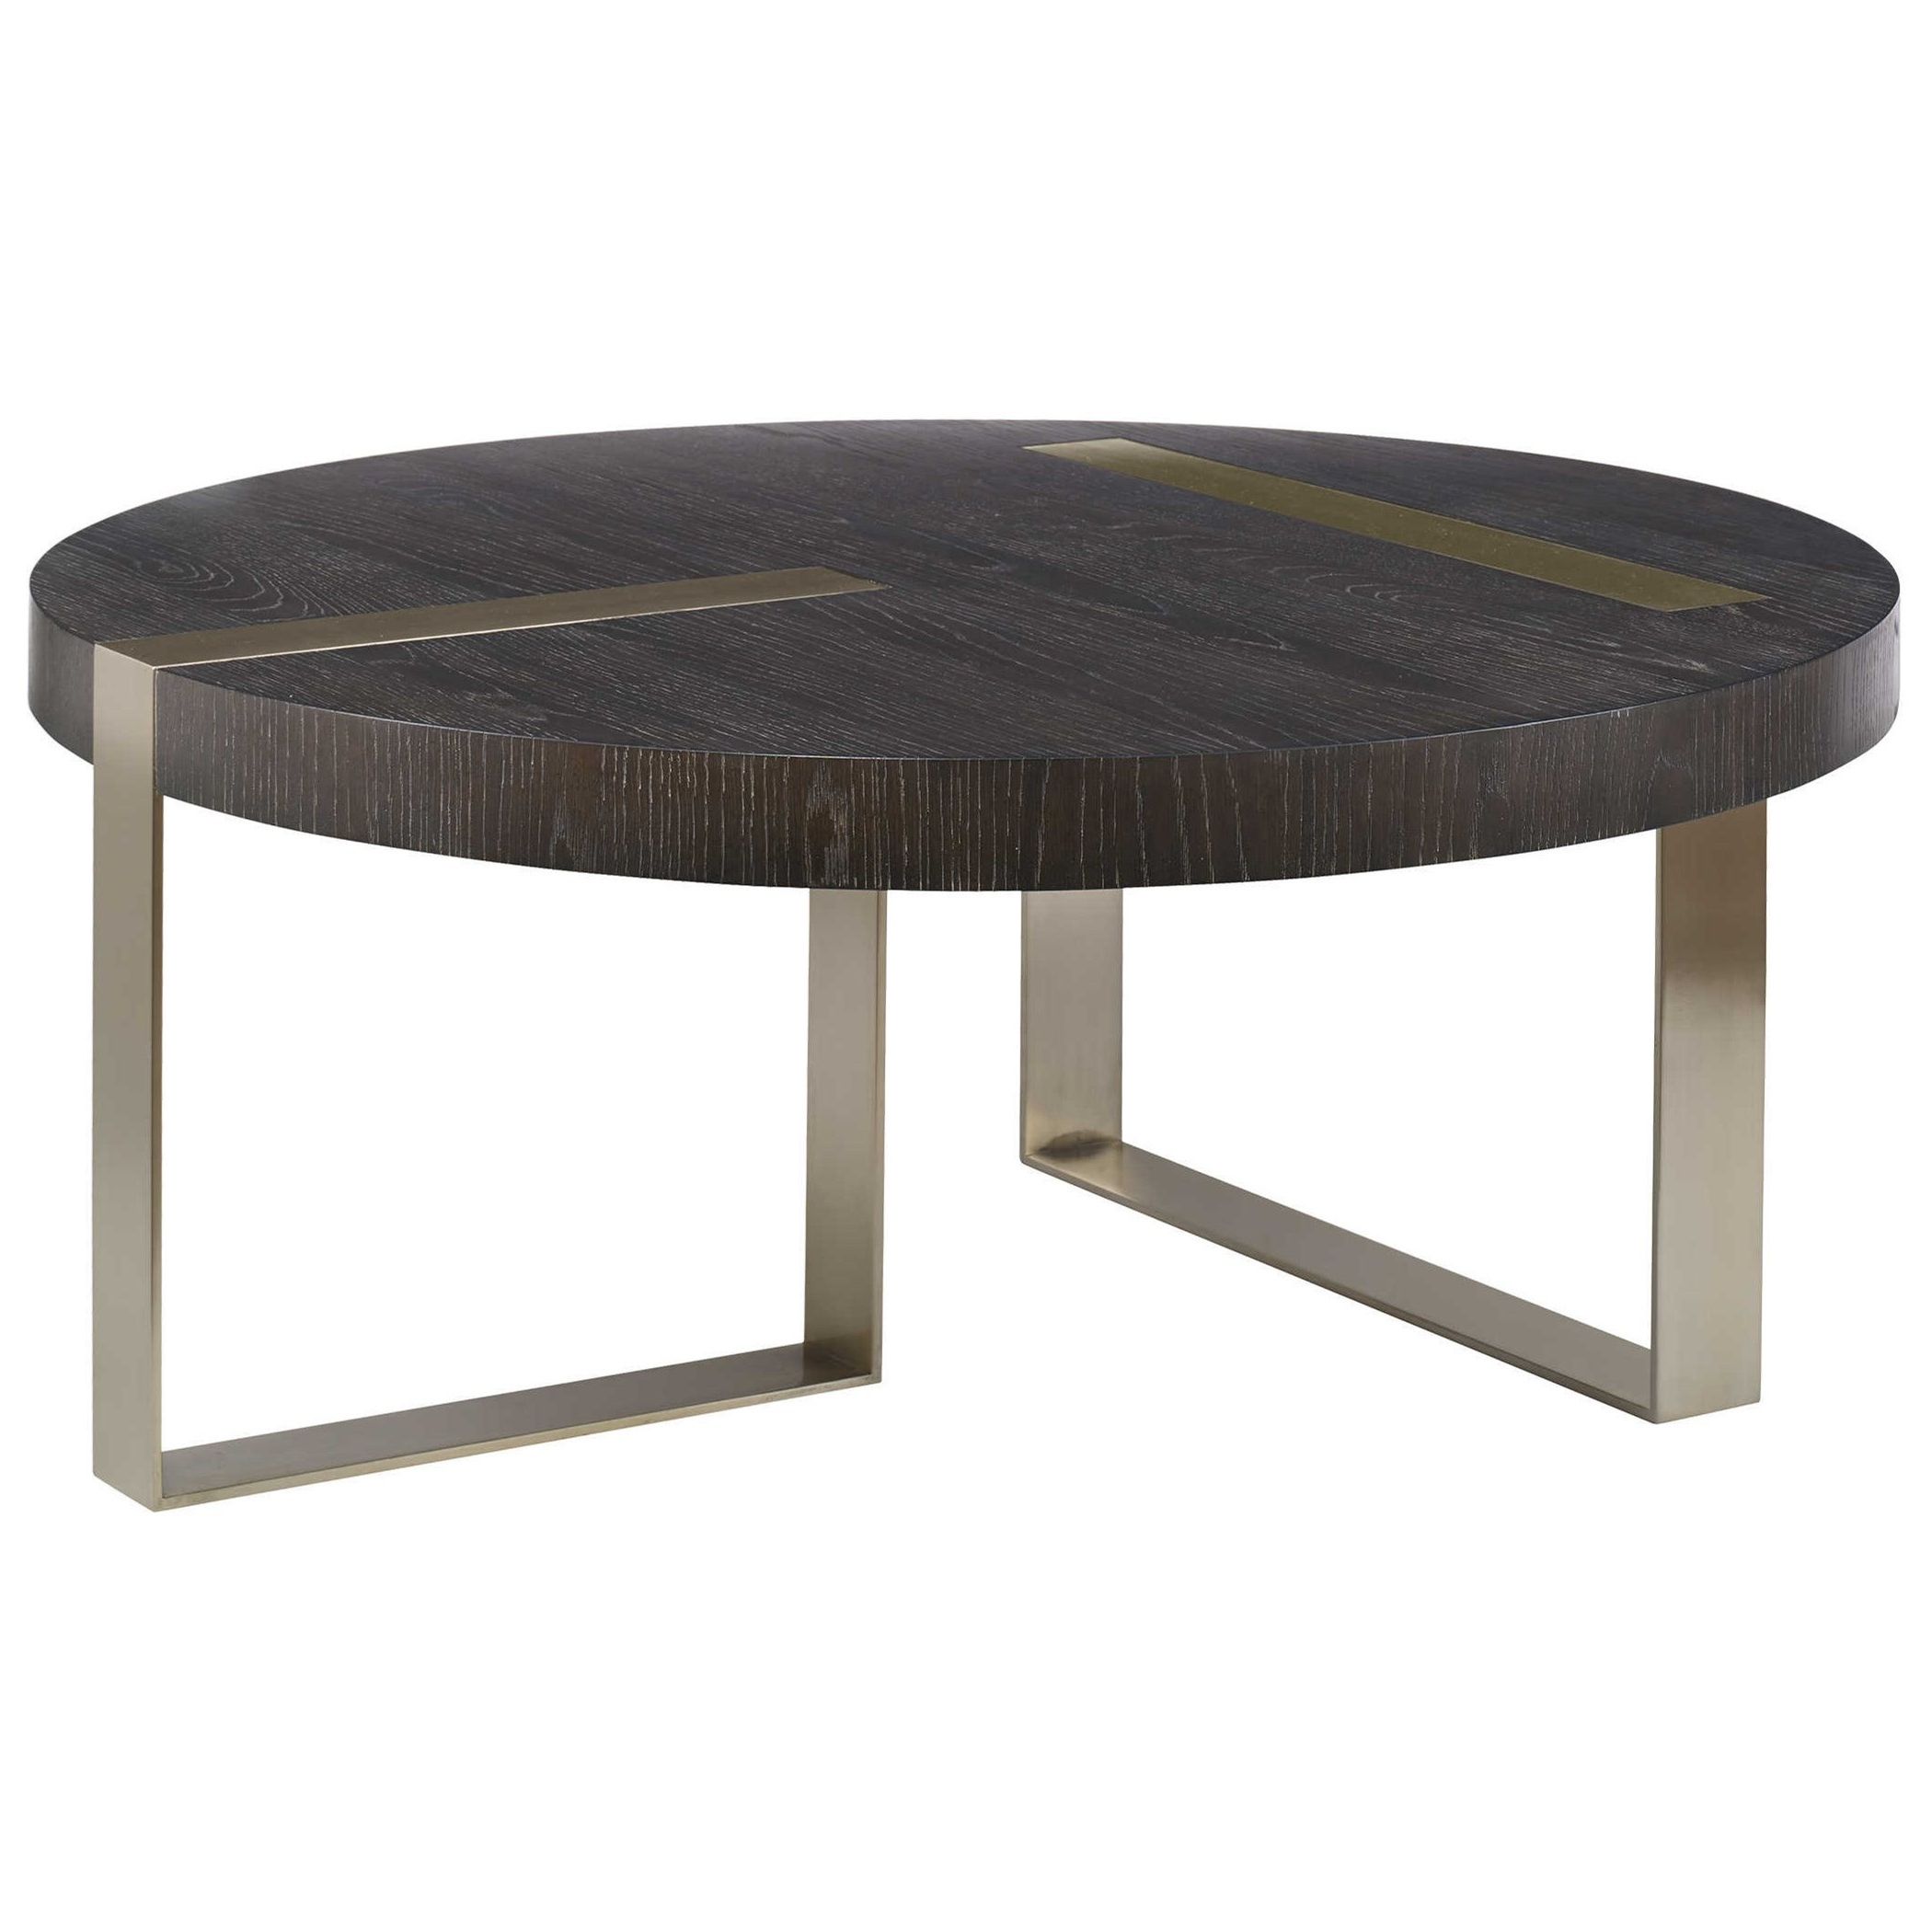 Uttermost Accent Furniture – Occasional Tables Converge Round Coffee Inside Recent Occasional Coffee Tables (View 6 of 15)